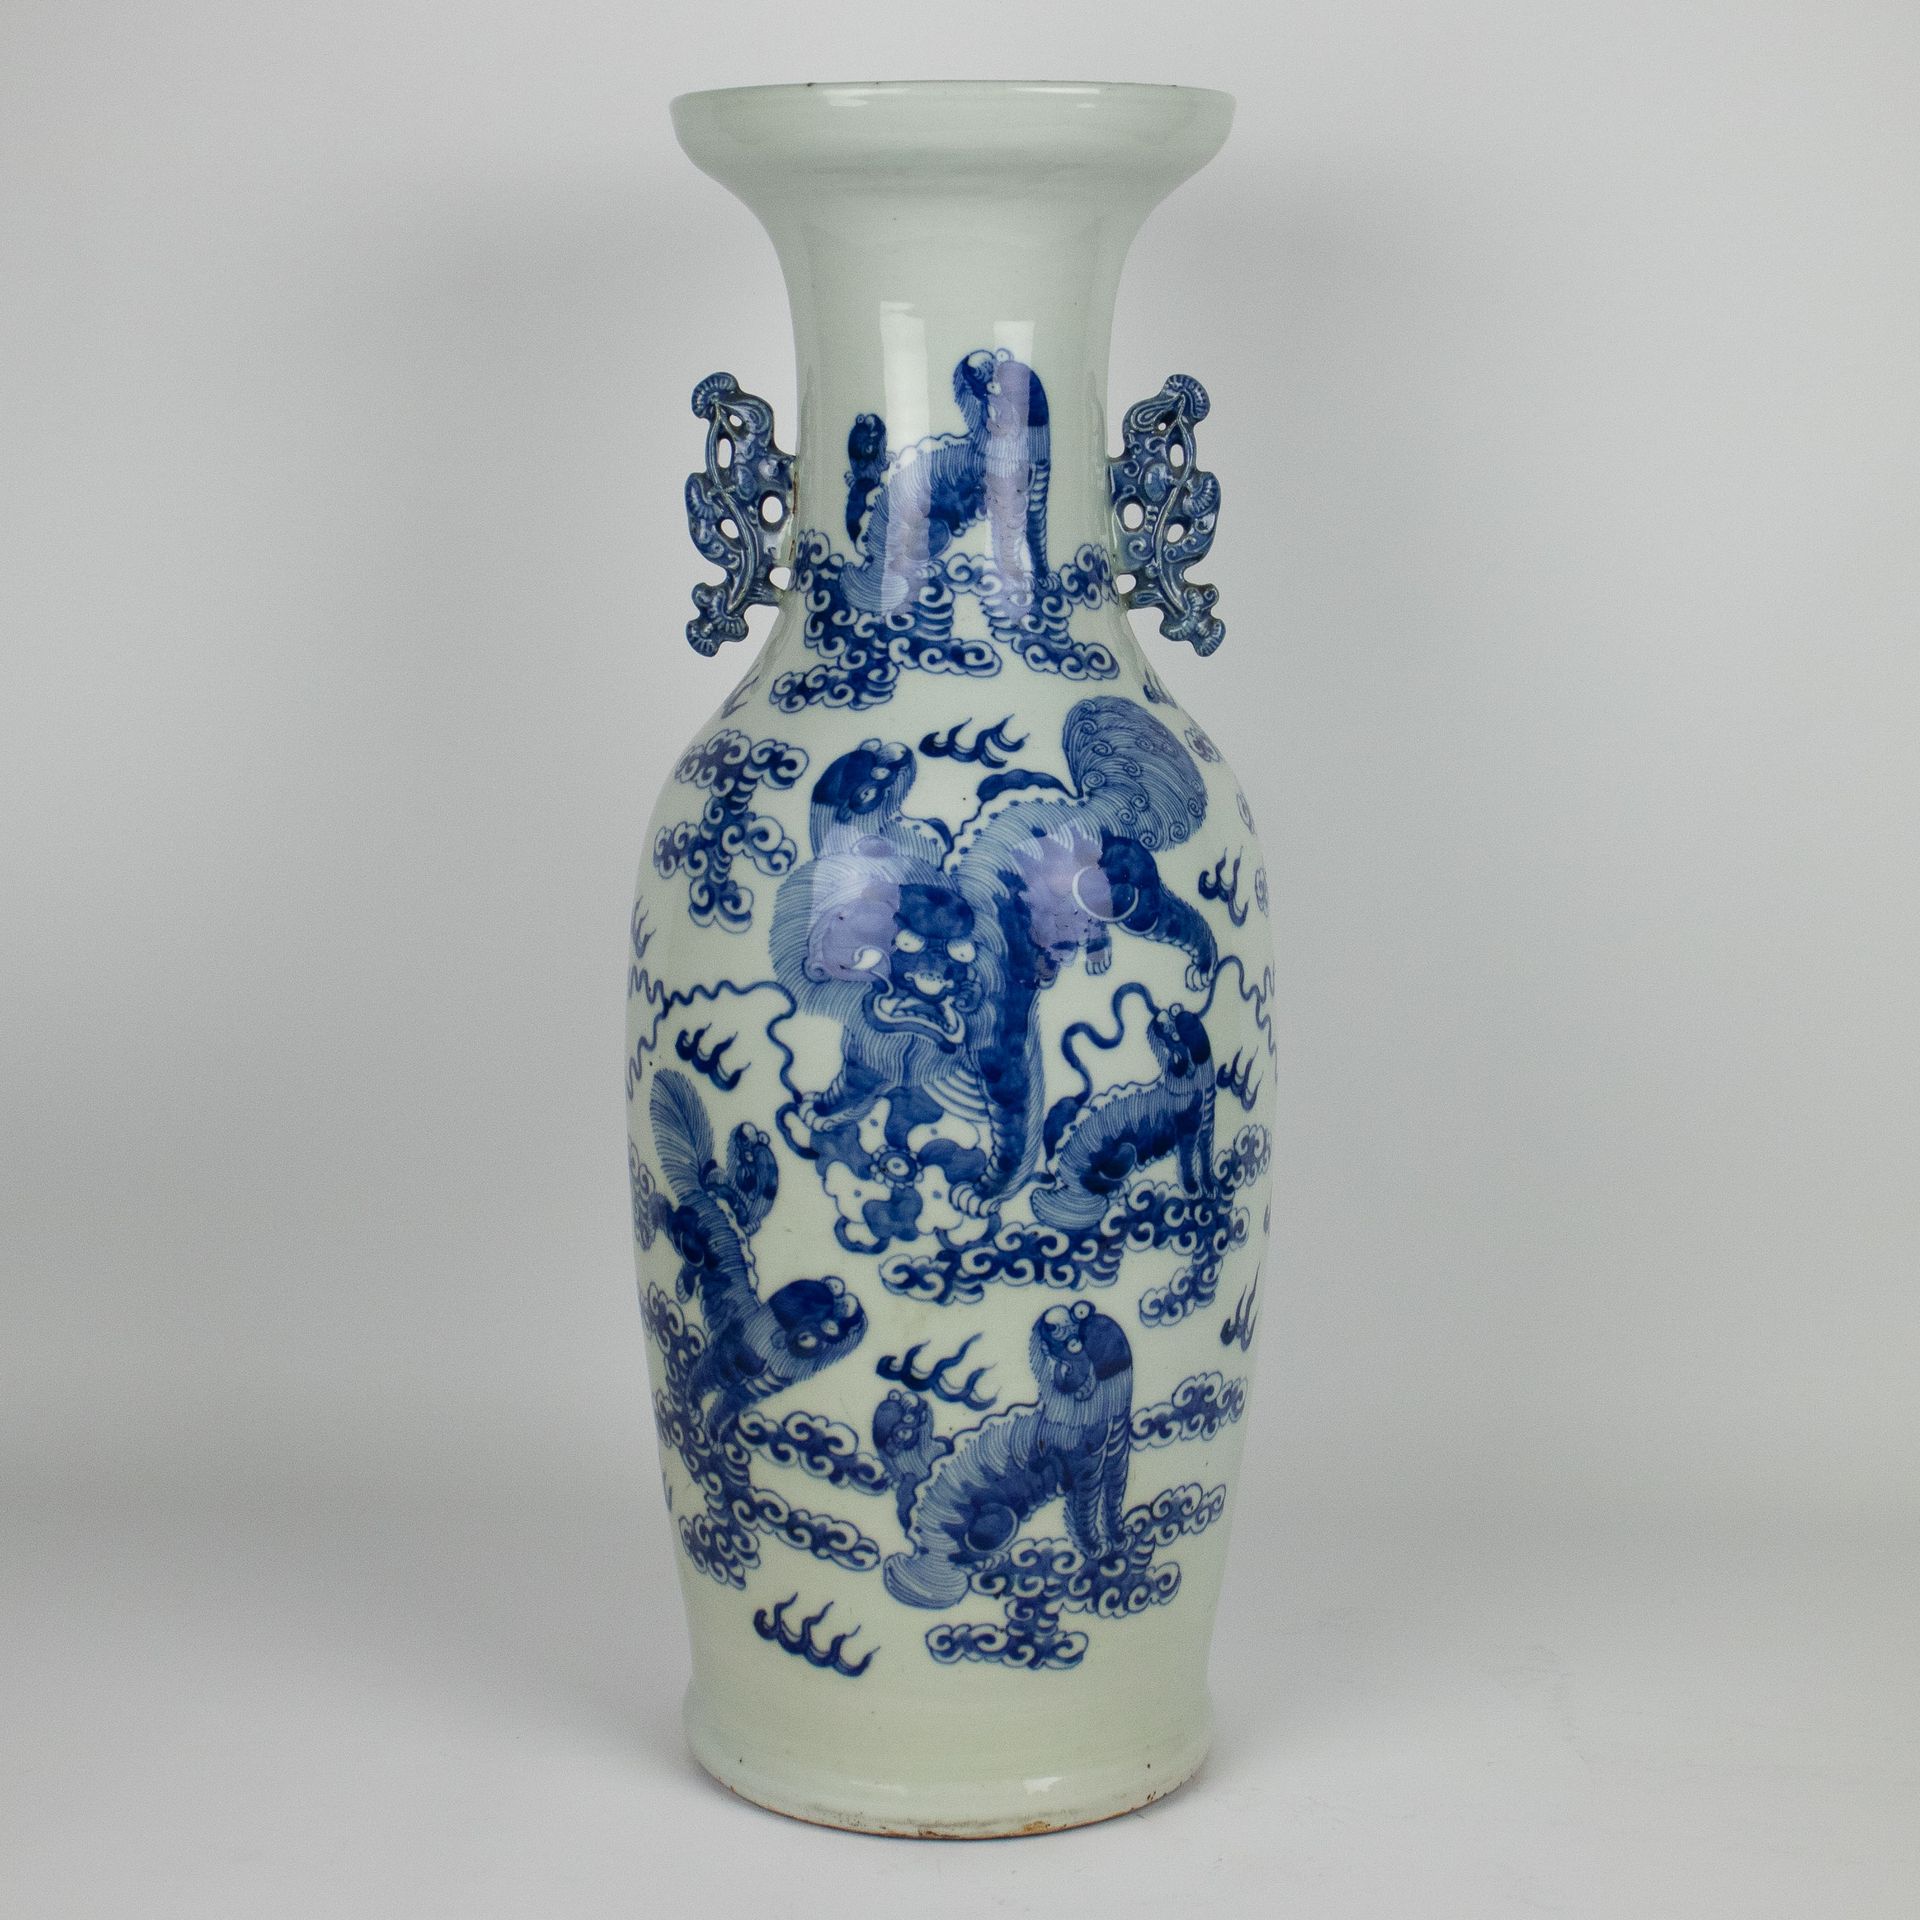 A Chinese celadon vase end 19th century Decorated with Pho dogs and cubs. Een Ch&hellip;